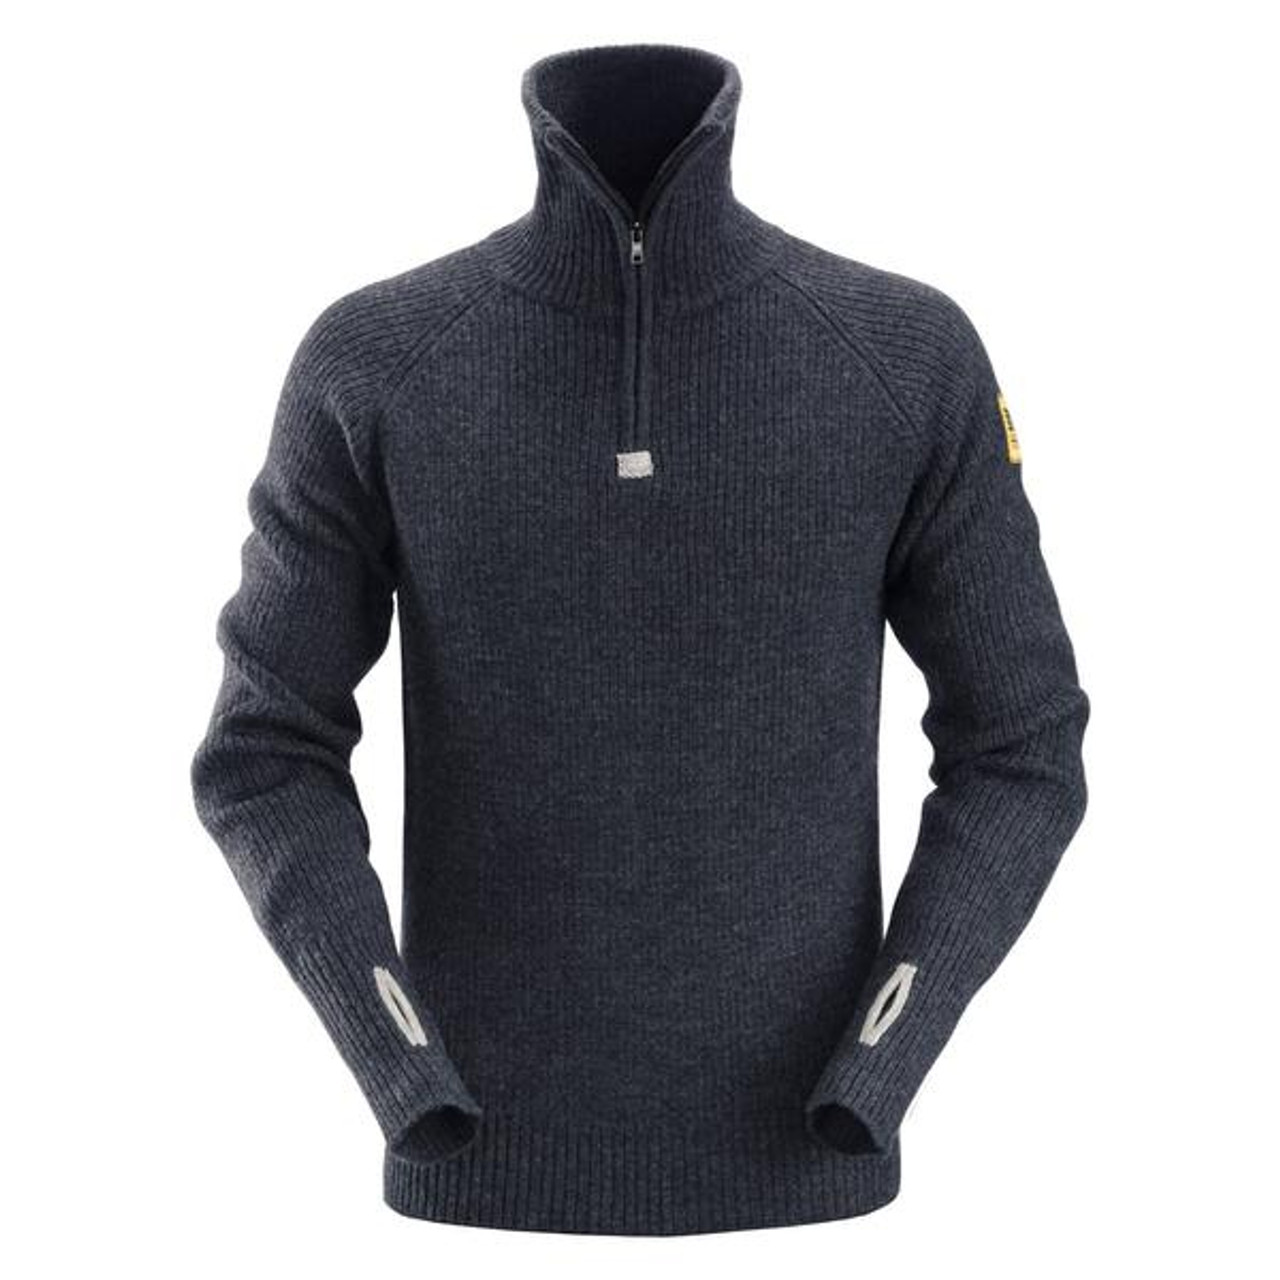 Buy online in Australia and New Zealand a  Navy Blue Pullover  for Electricians that are comfortable and durable.